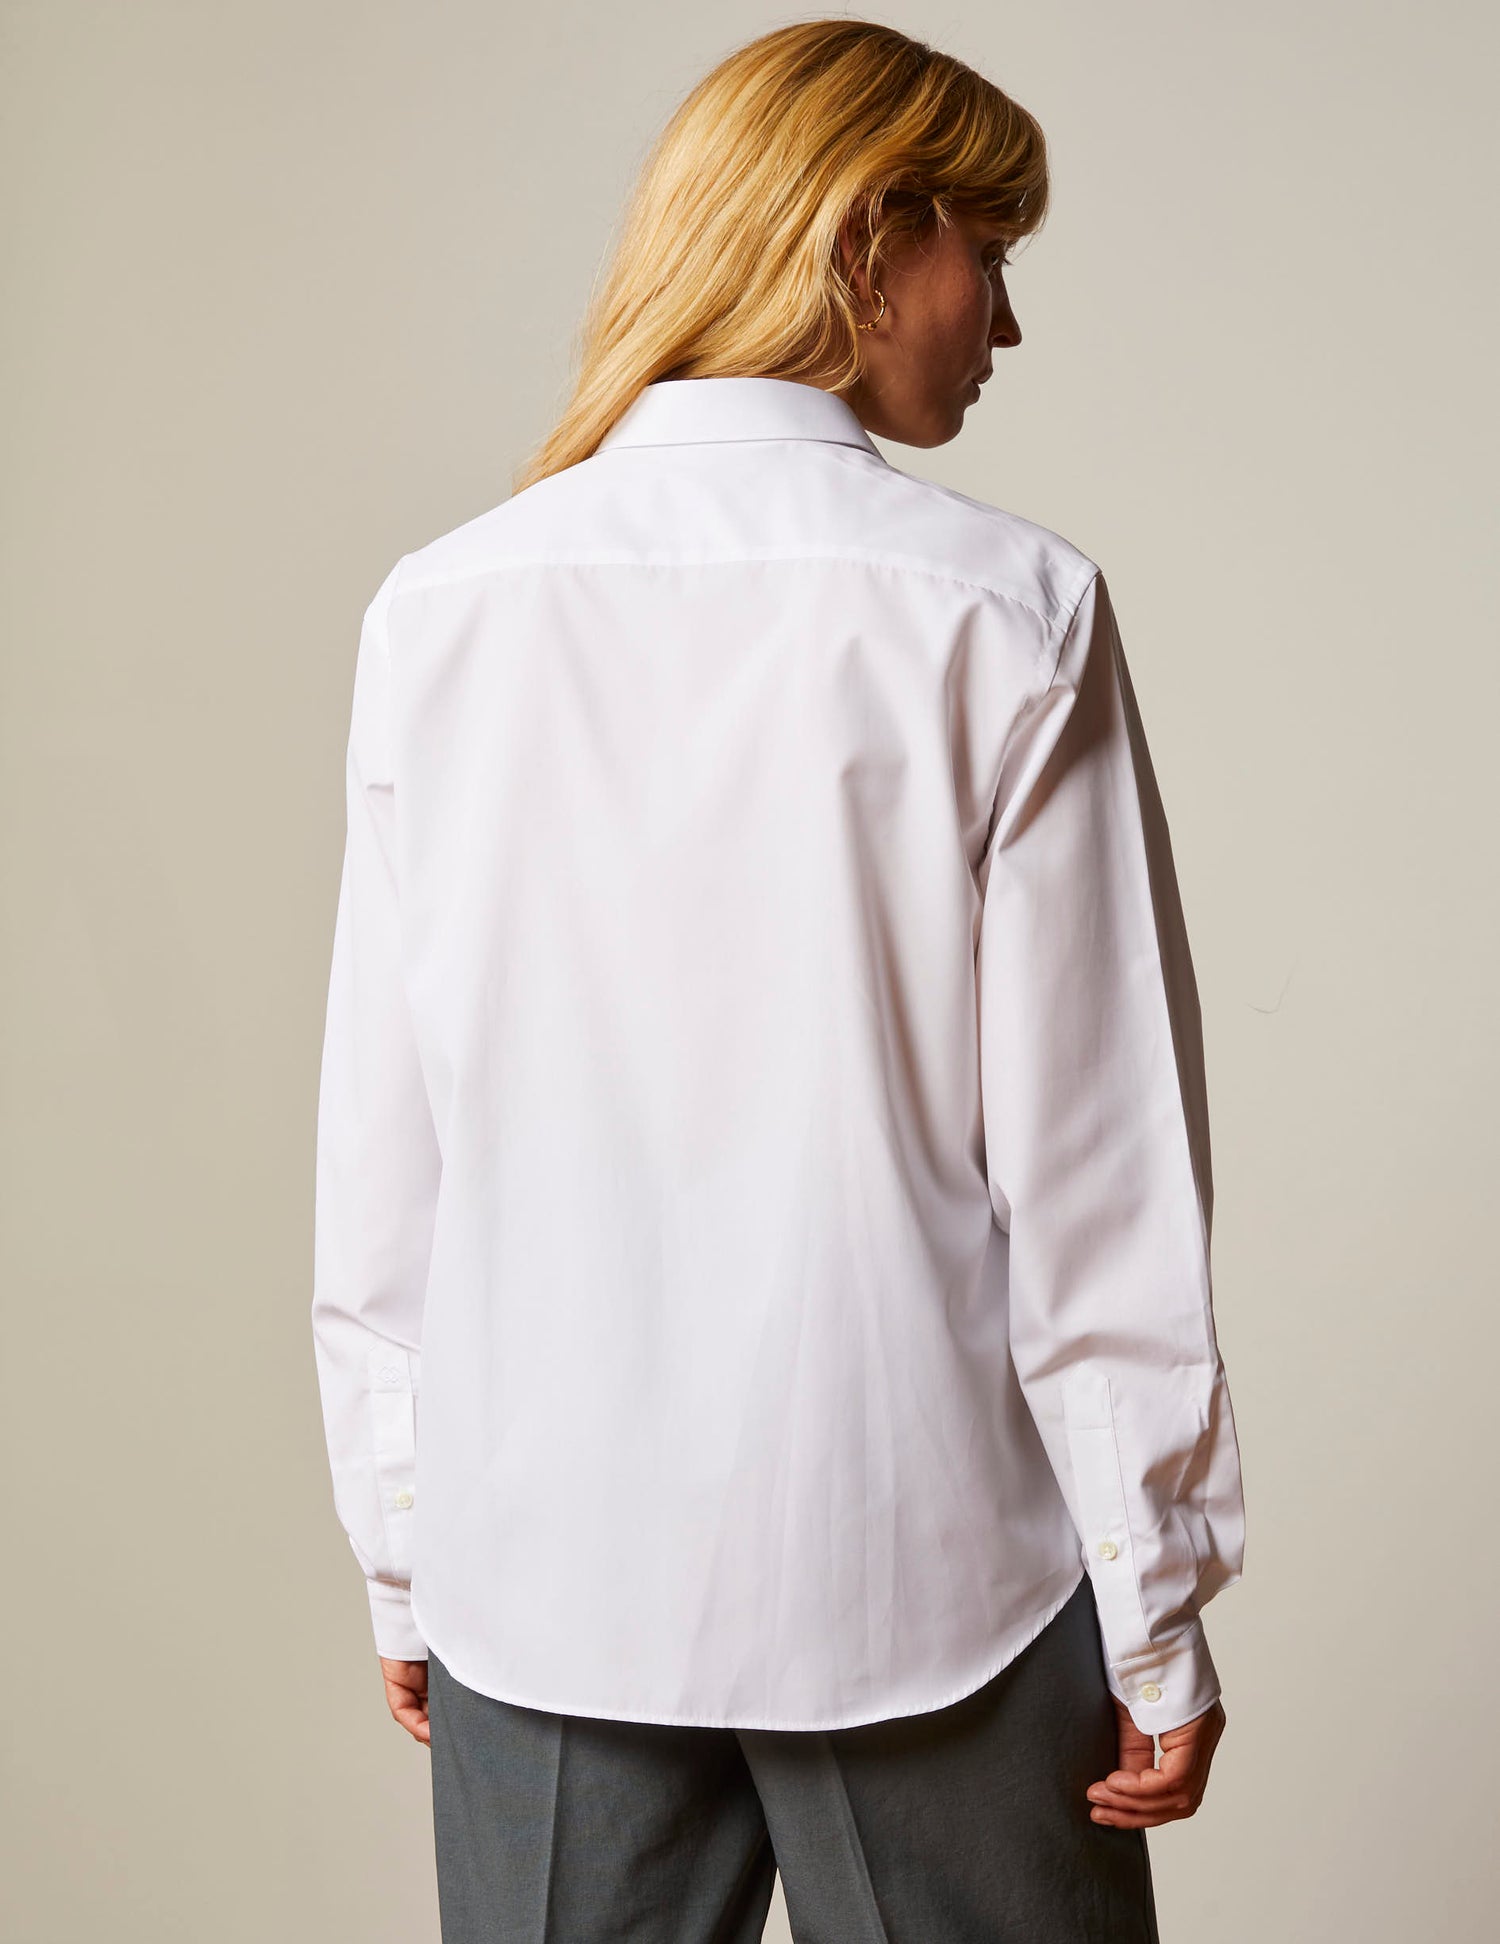 White "Je t'aime" shirt with grey embroidery - Poplin - Figaret Collar#8